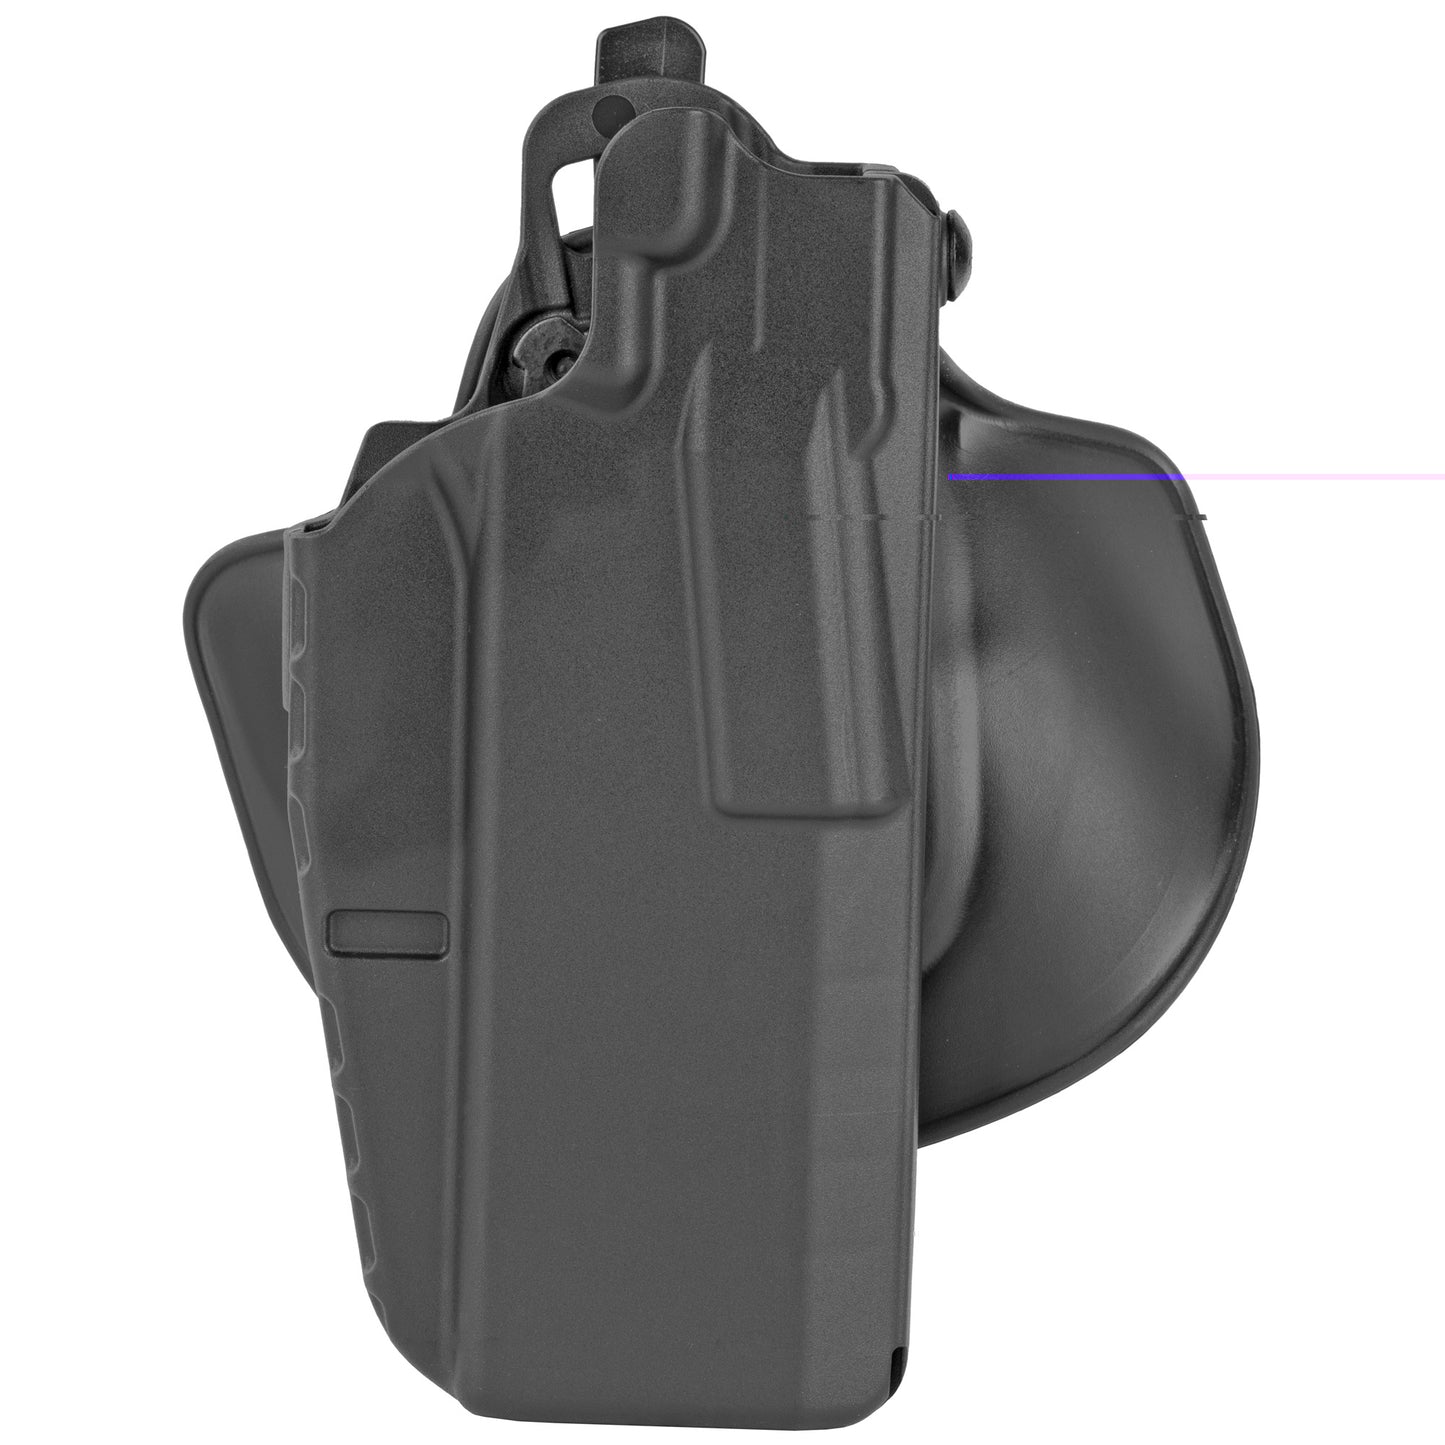 Safariland, Model 7378, 7TS, ALS Slim Concealment Holster w/ Flexible Paddle and Adjustable Belt Loop, Fits 1911 Government, Kydex, Black, Right Hand